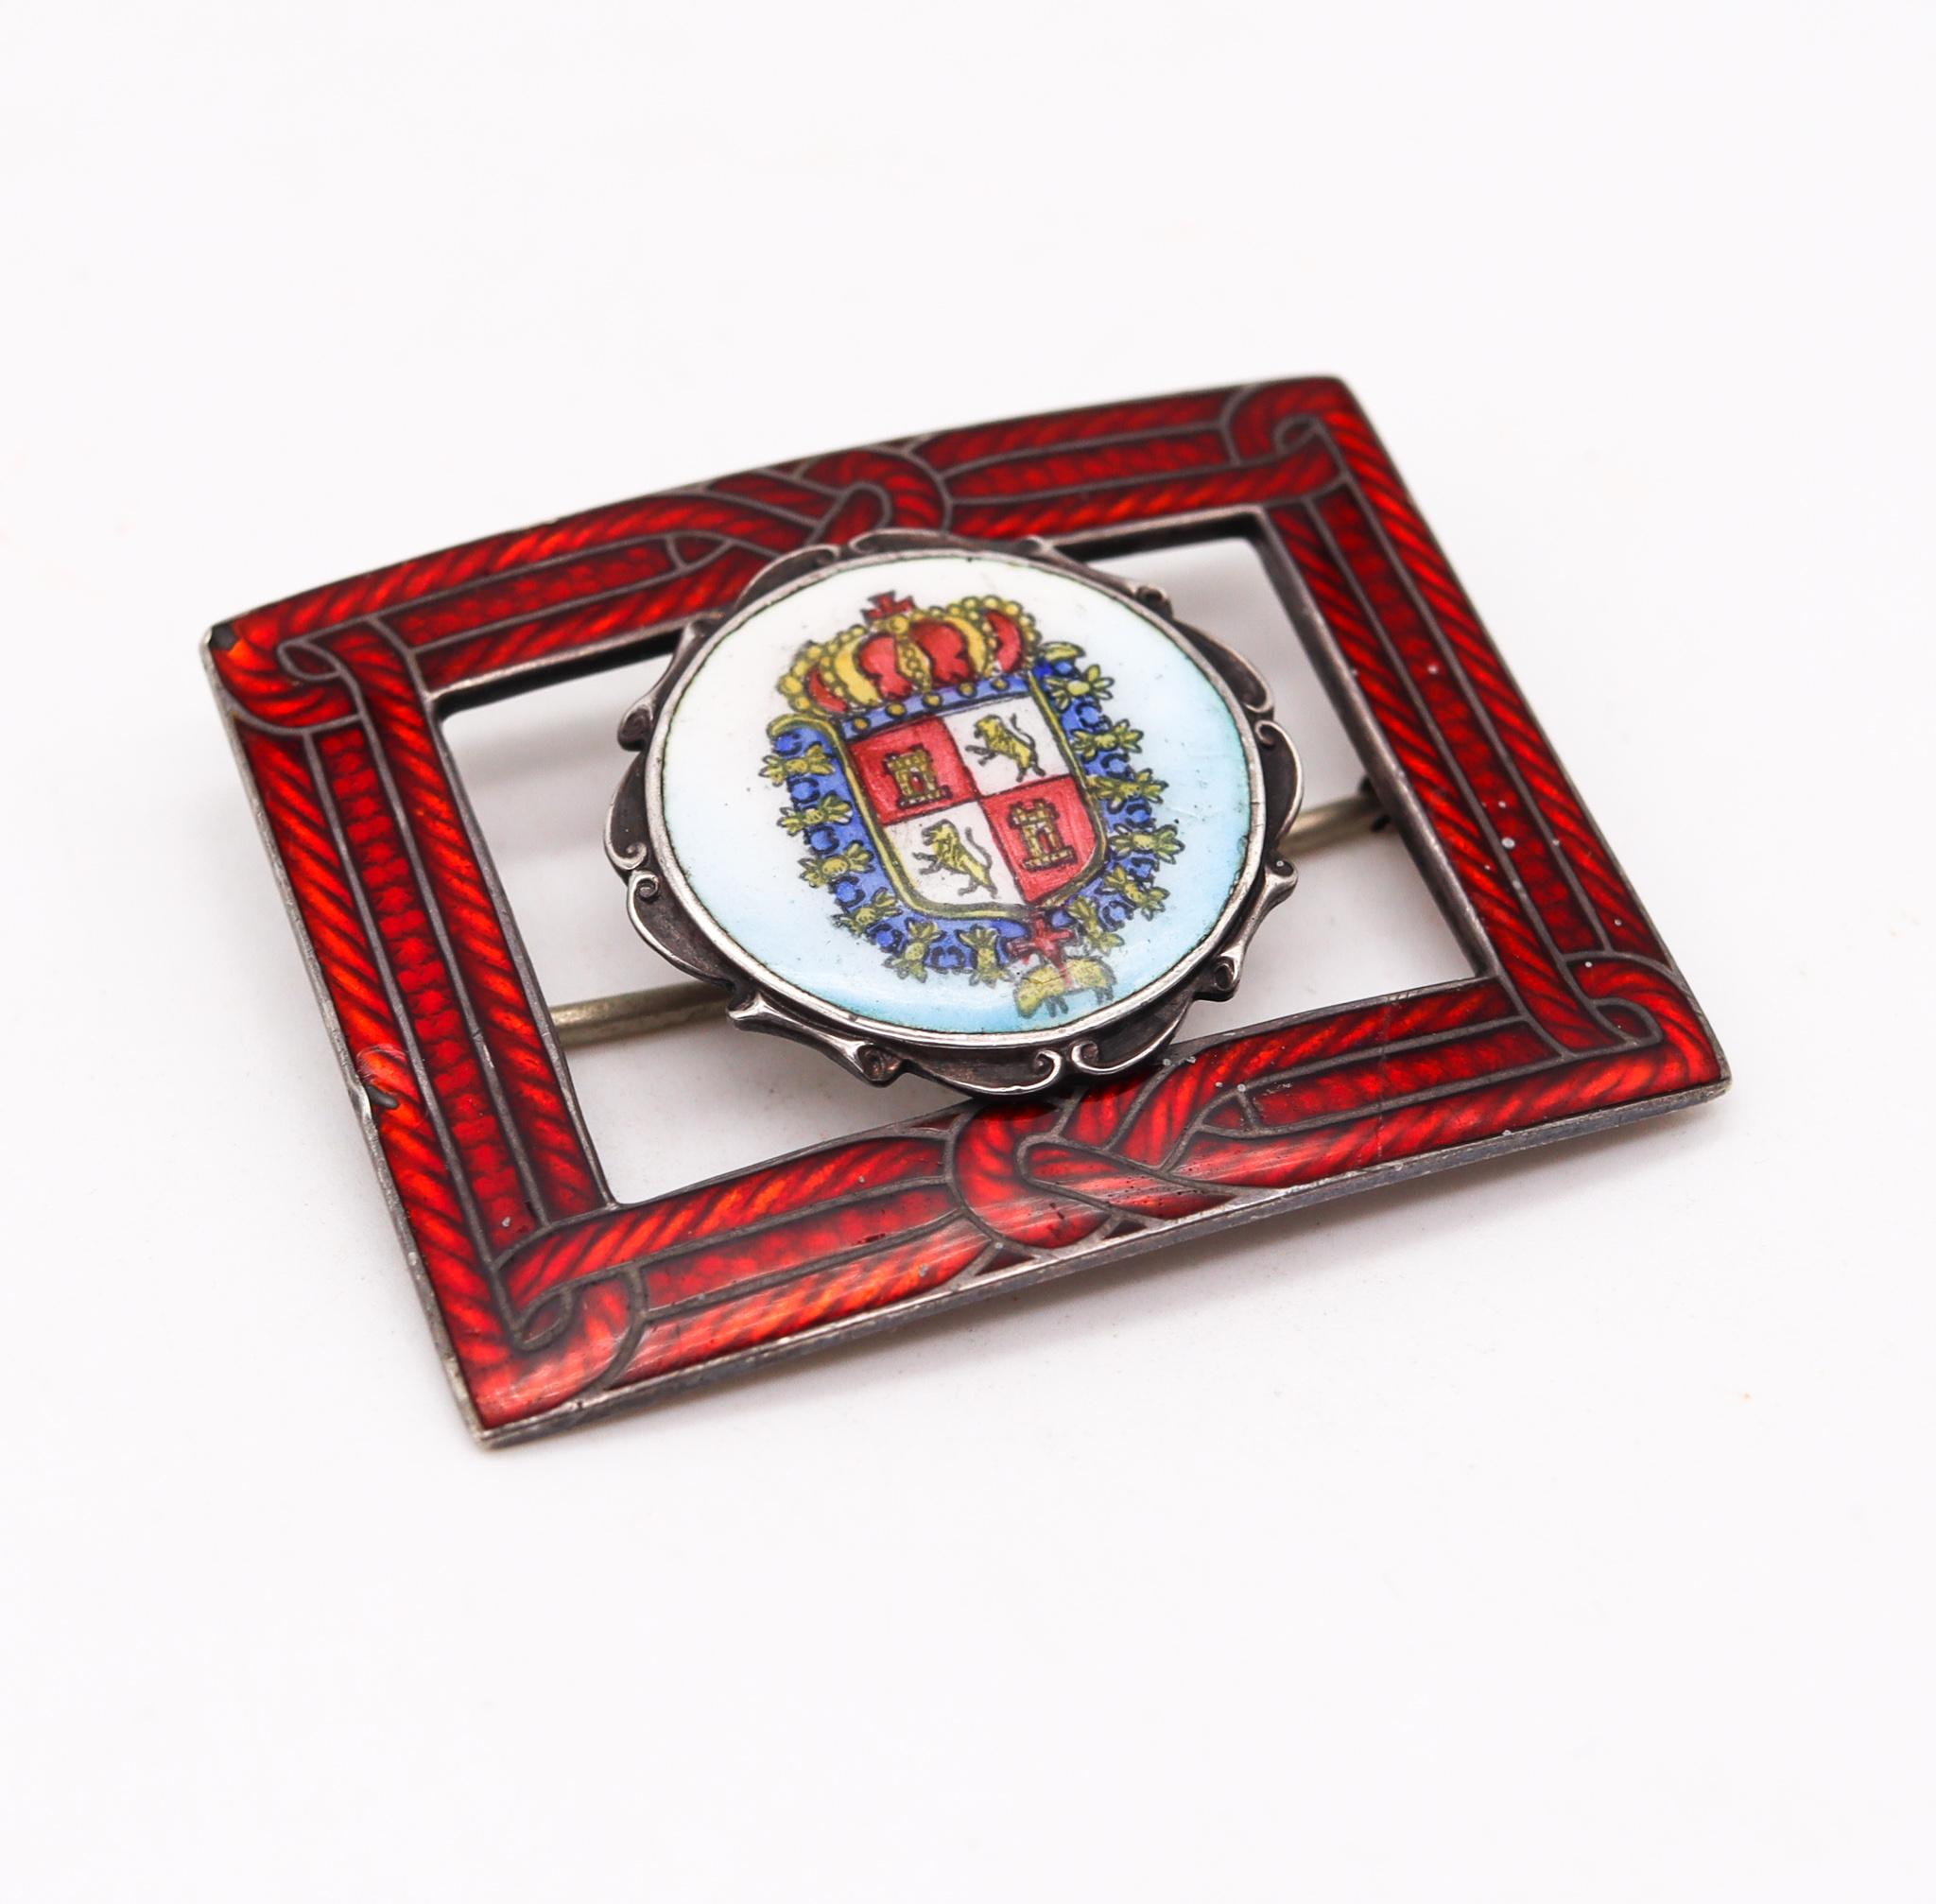 Patriotic Monarchy brooch with Spanish royal coat of arms.

Colorful piece depicting the Spanish royal coat of arms, created between the 1880 and the 1912. This pro monarchic brooch has been crafted in solid .925/.999 sterling silver and decorated